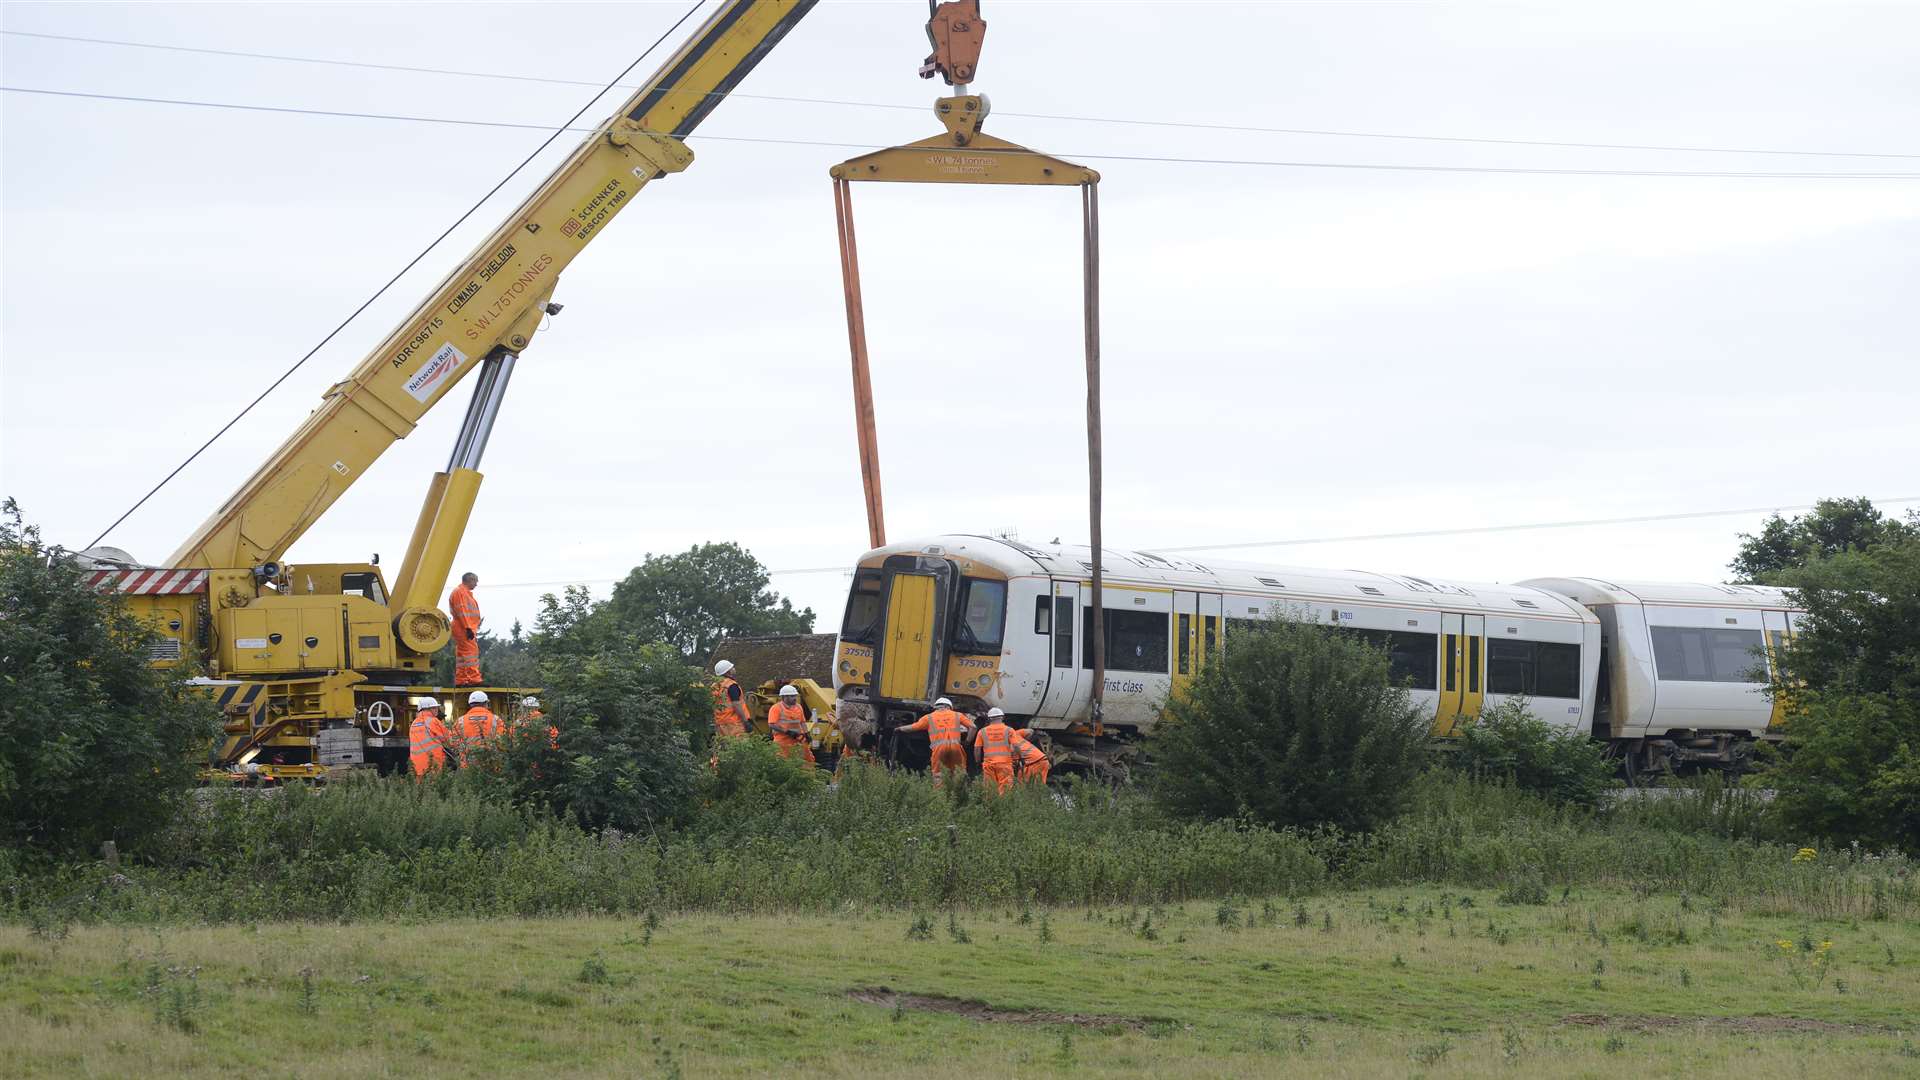 Strops are put on the train to lift it. Picture: Paul Amos.